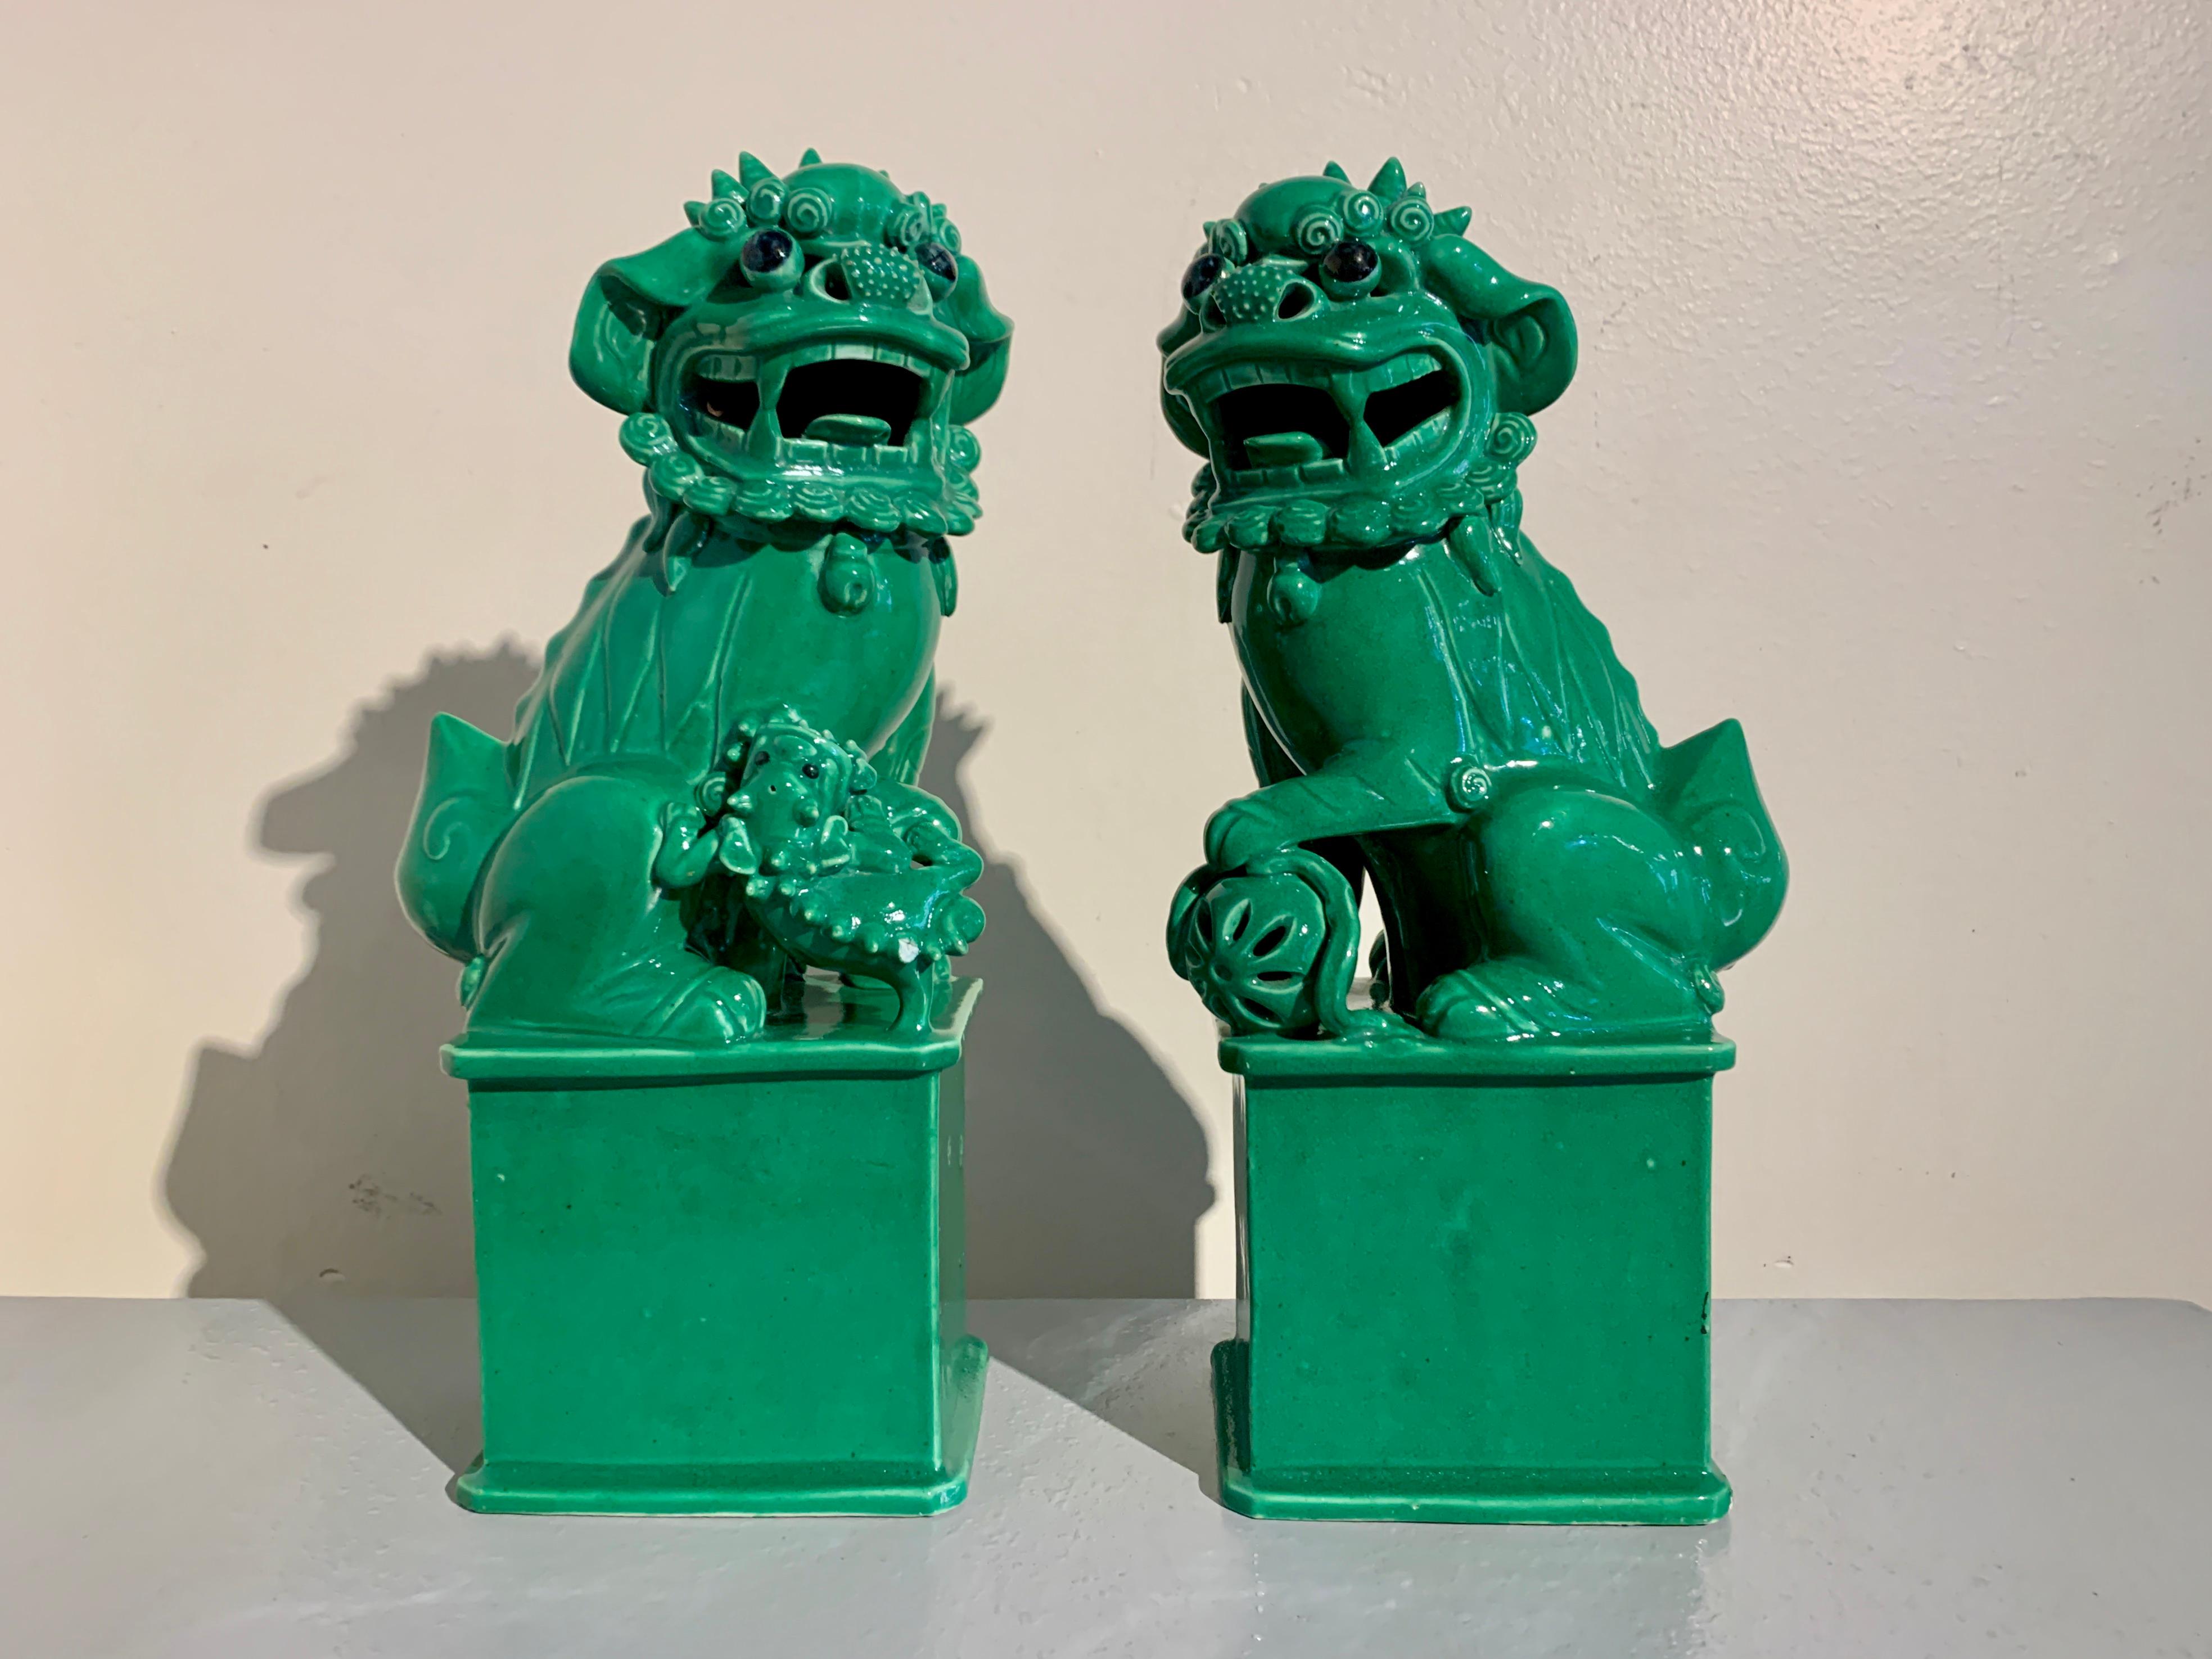 A darling and charming pair of vintage Chinese green glazed porcelain foo dogs or foo lions, late 20th century, circa 1970's, China.

The delightful pair of foo dogs, also referred to as foo lions, are raised upon tall rectangular pedestals. The foo